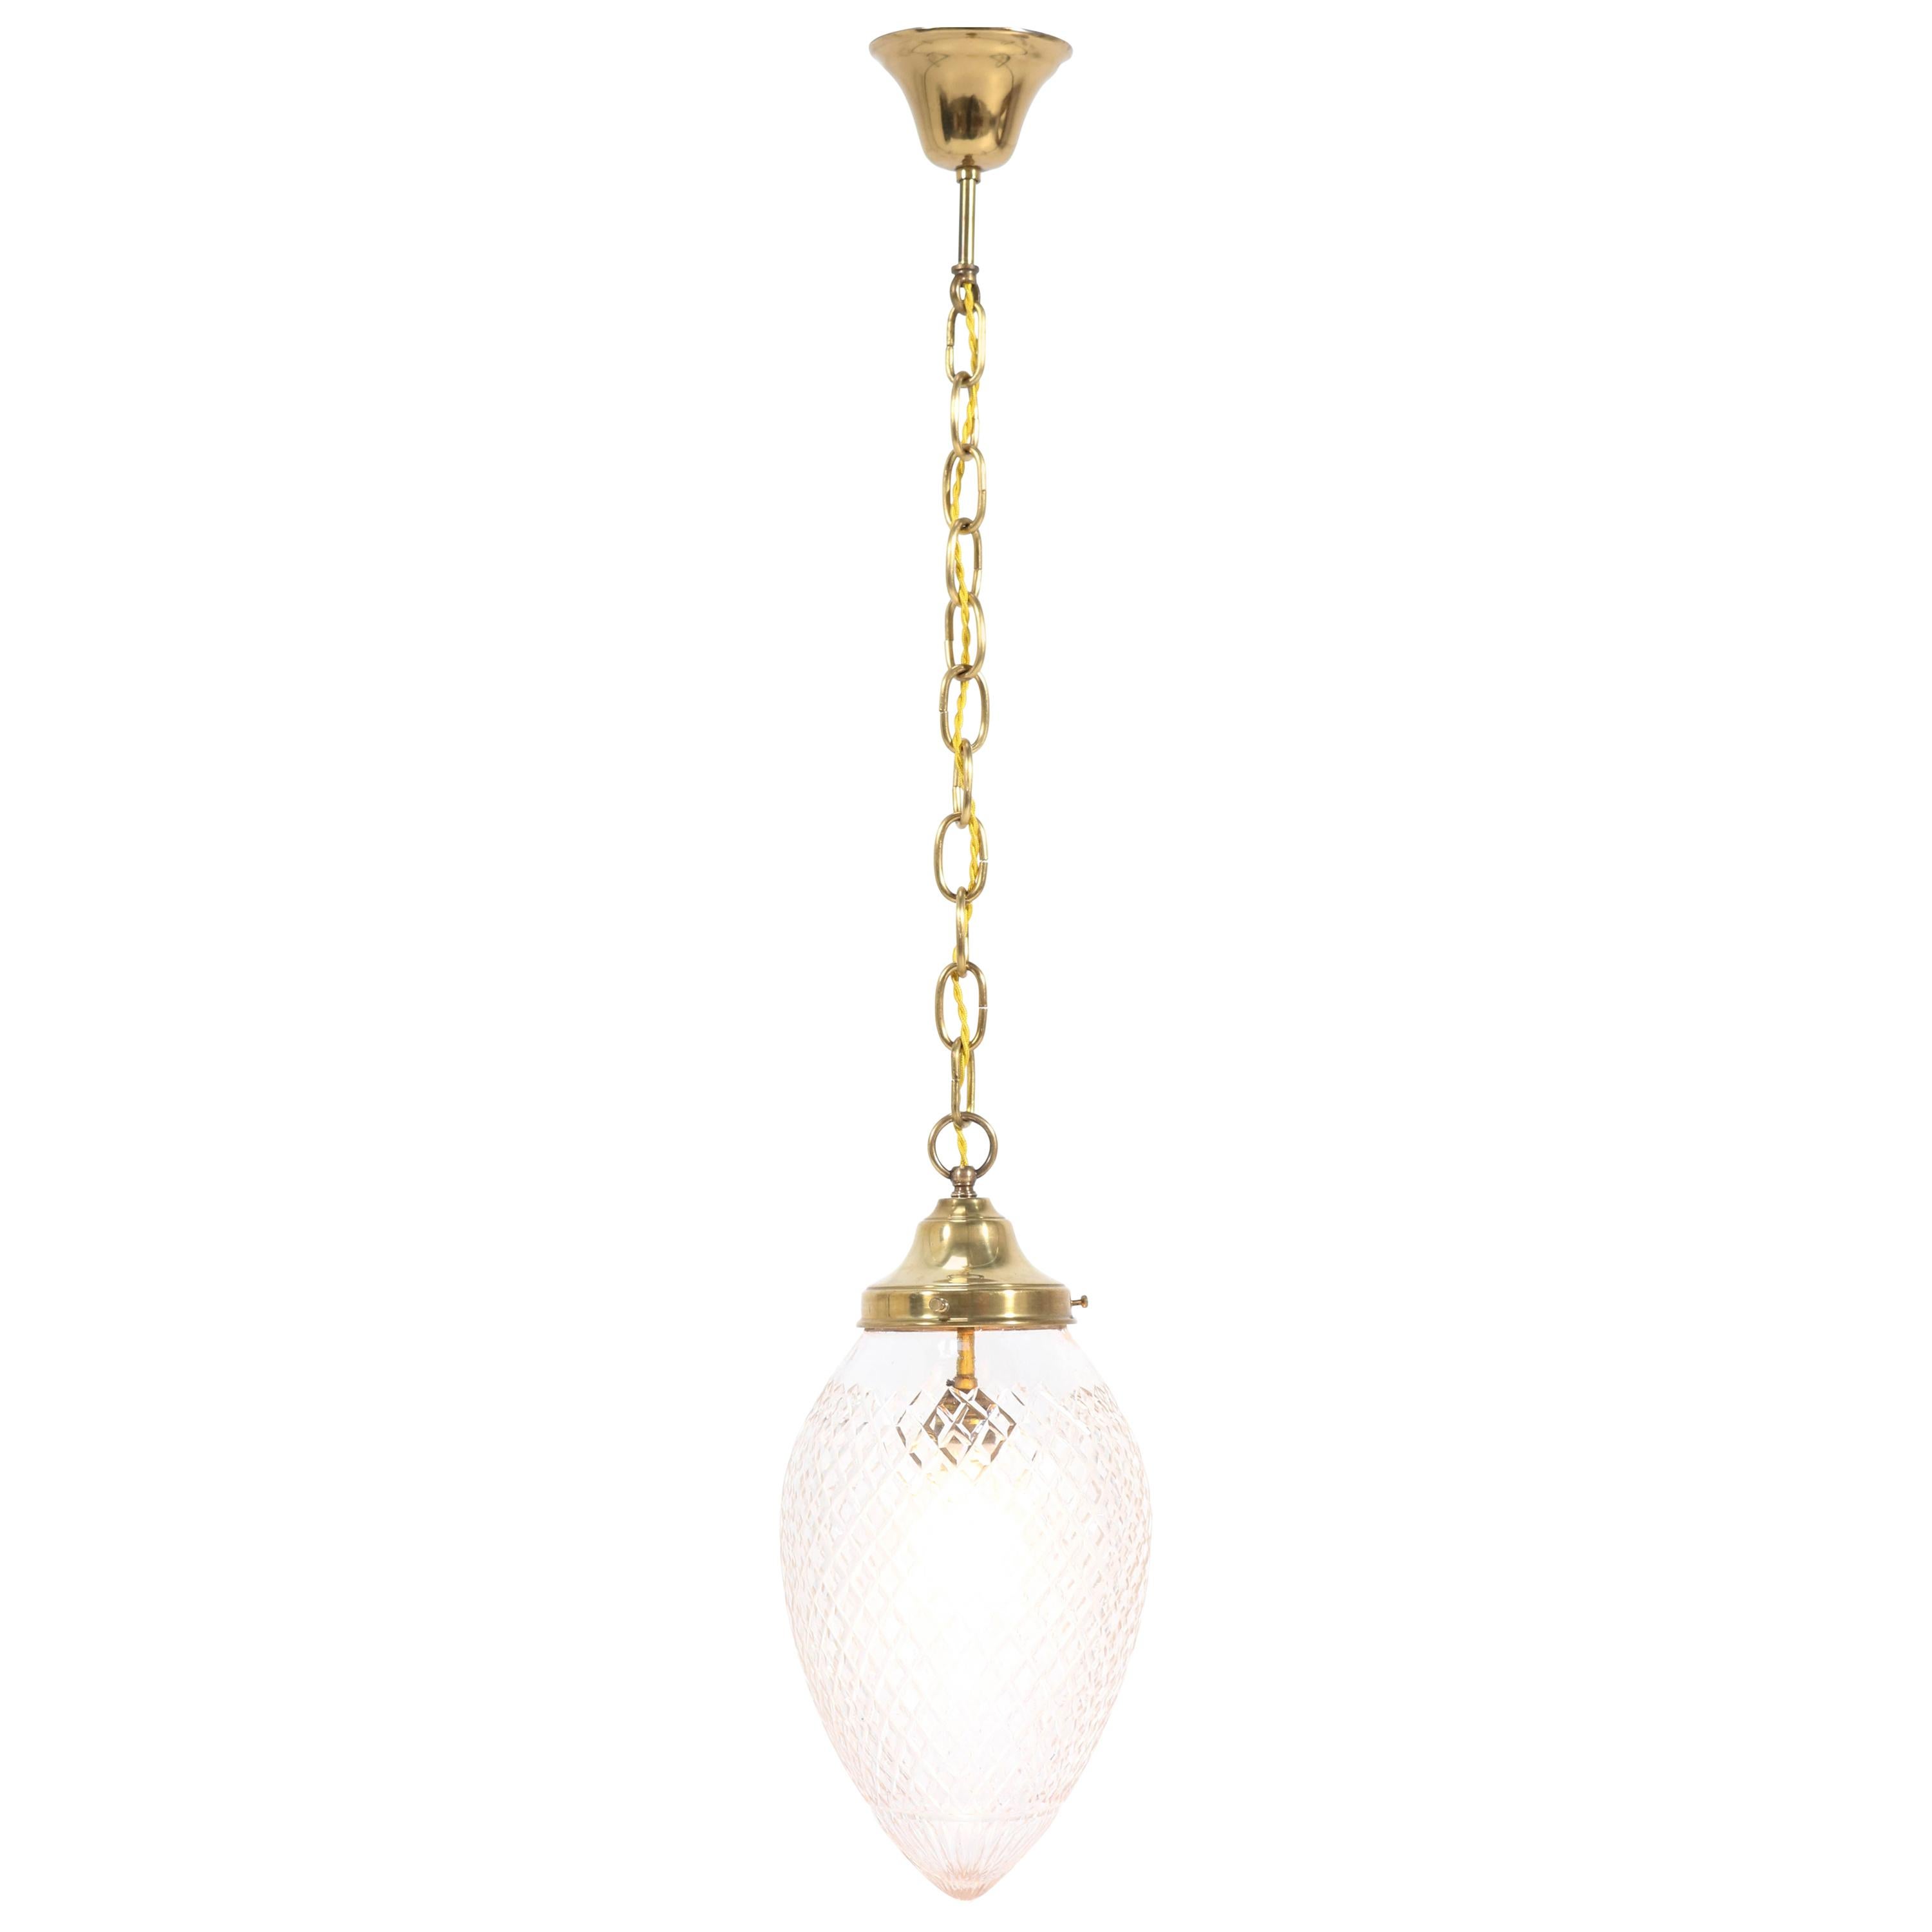 Brass French Art Nouveau Hall Light or Pendant with Beveled Glass, 1915